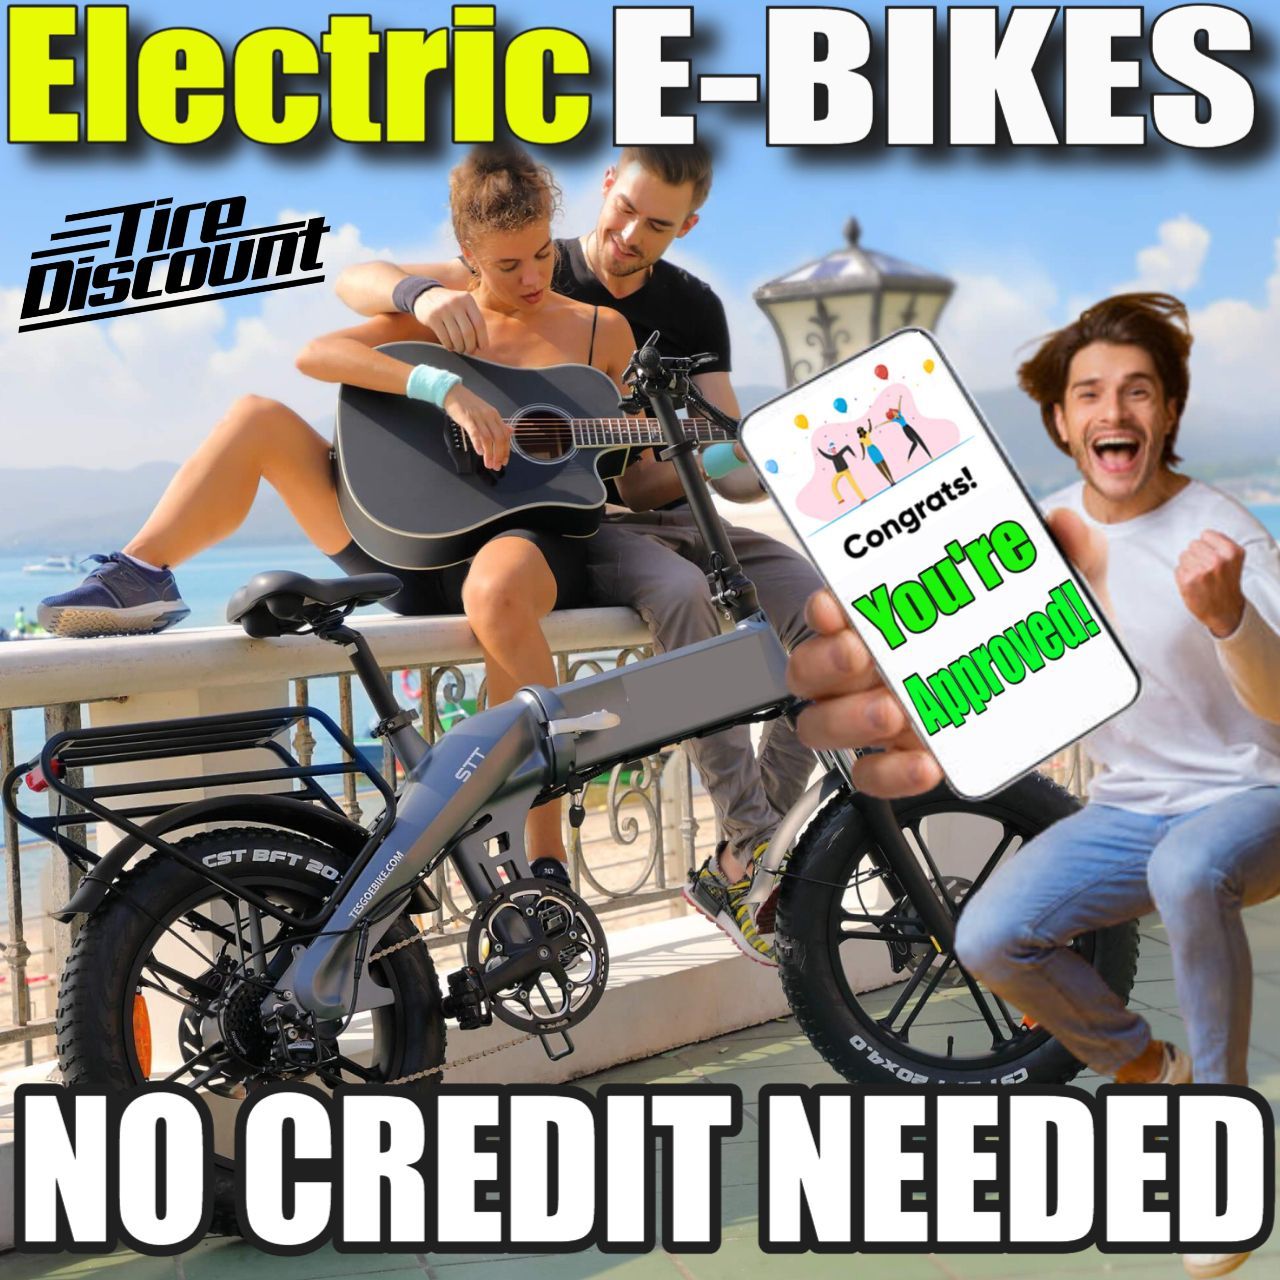 an ad for cheap electric e-bikes that says no credit needed